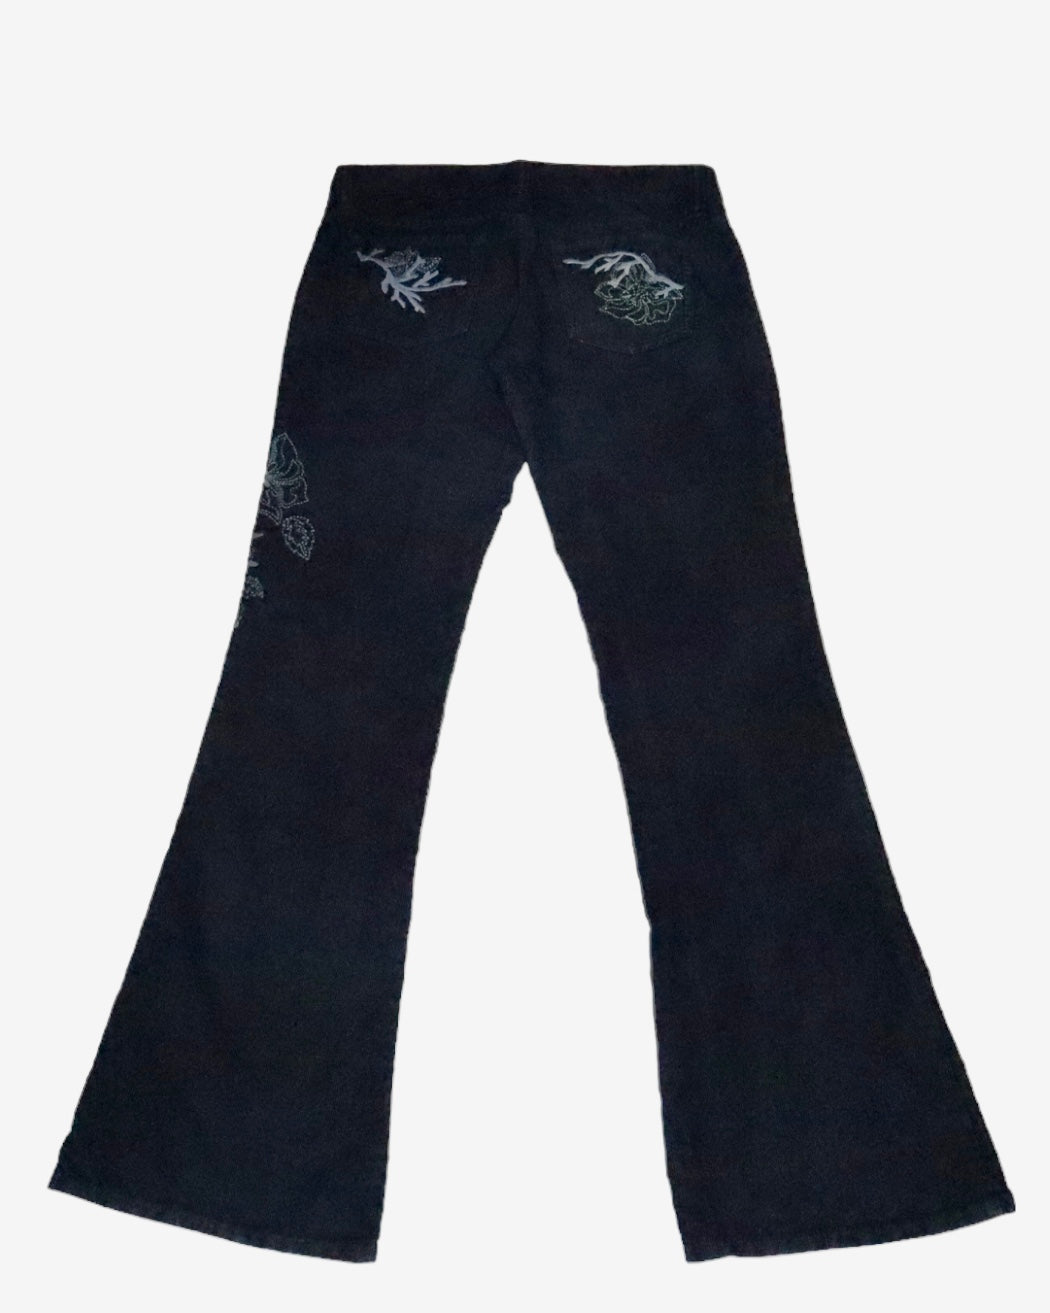 Guess Navy Corduroy Flare Pants (Small) 